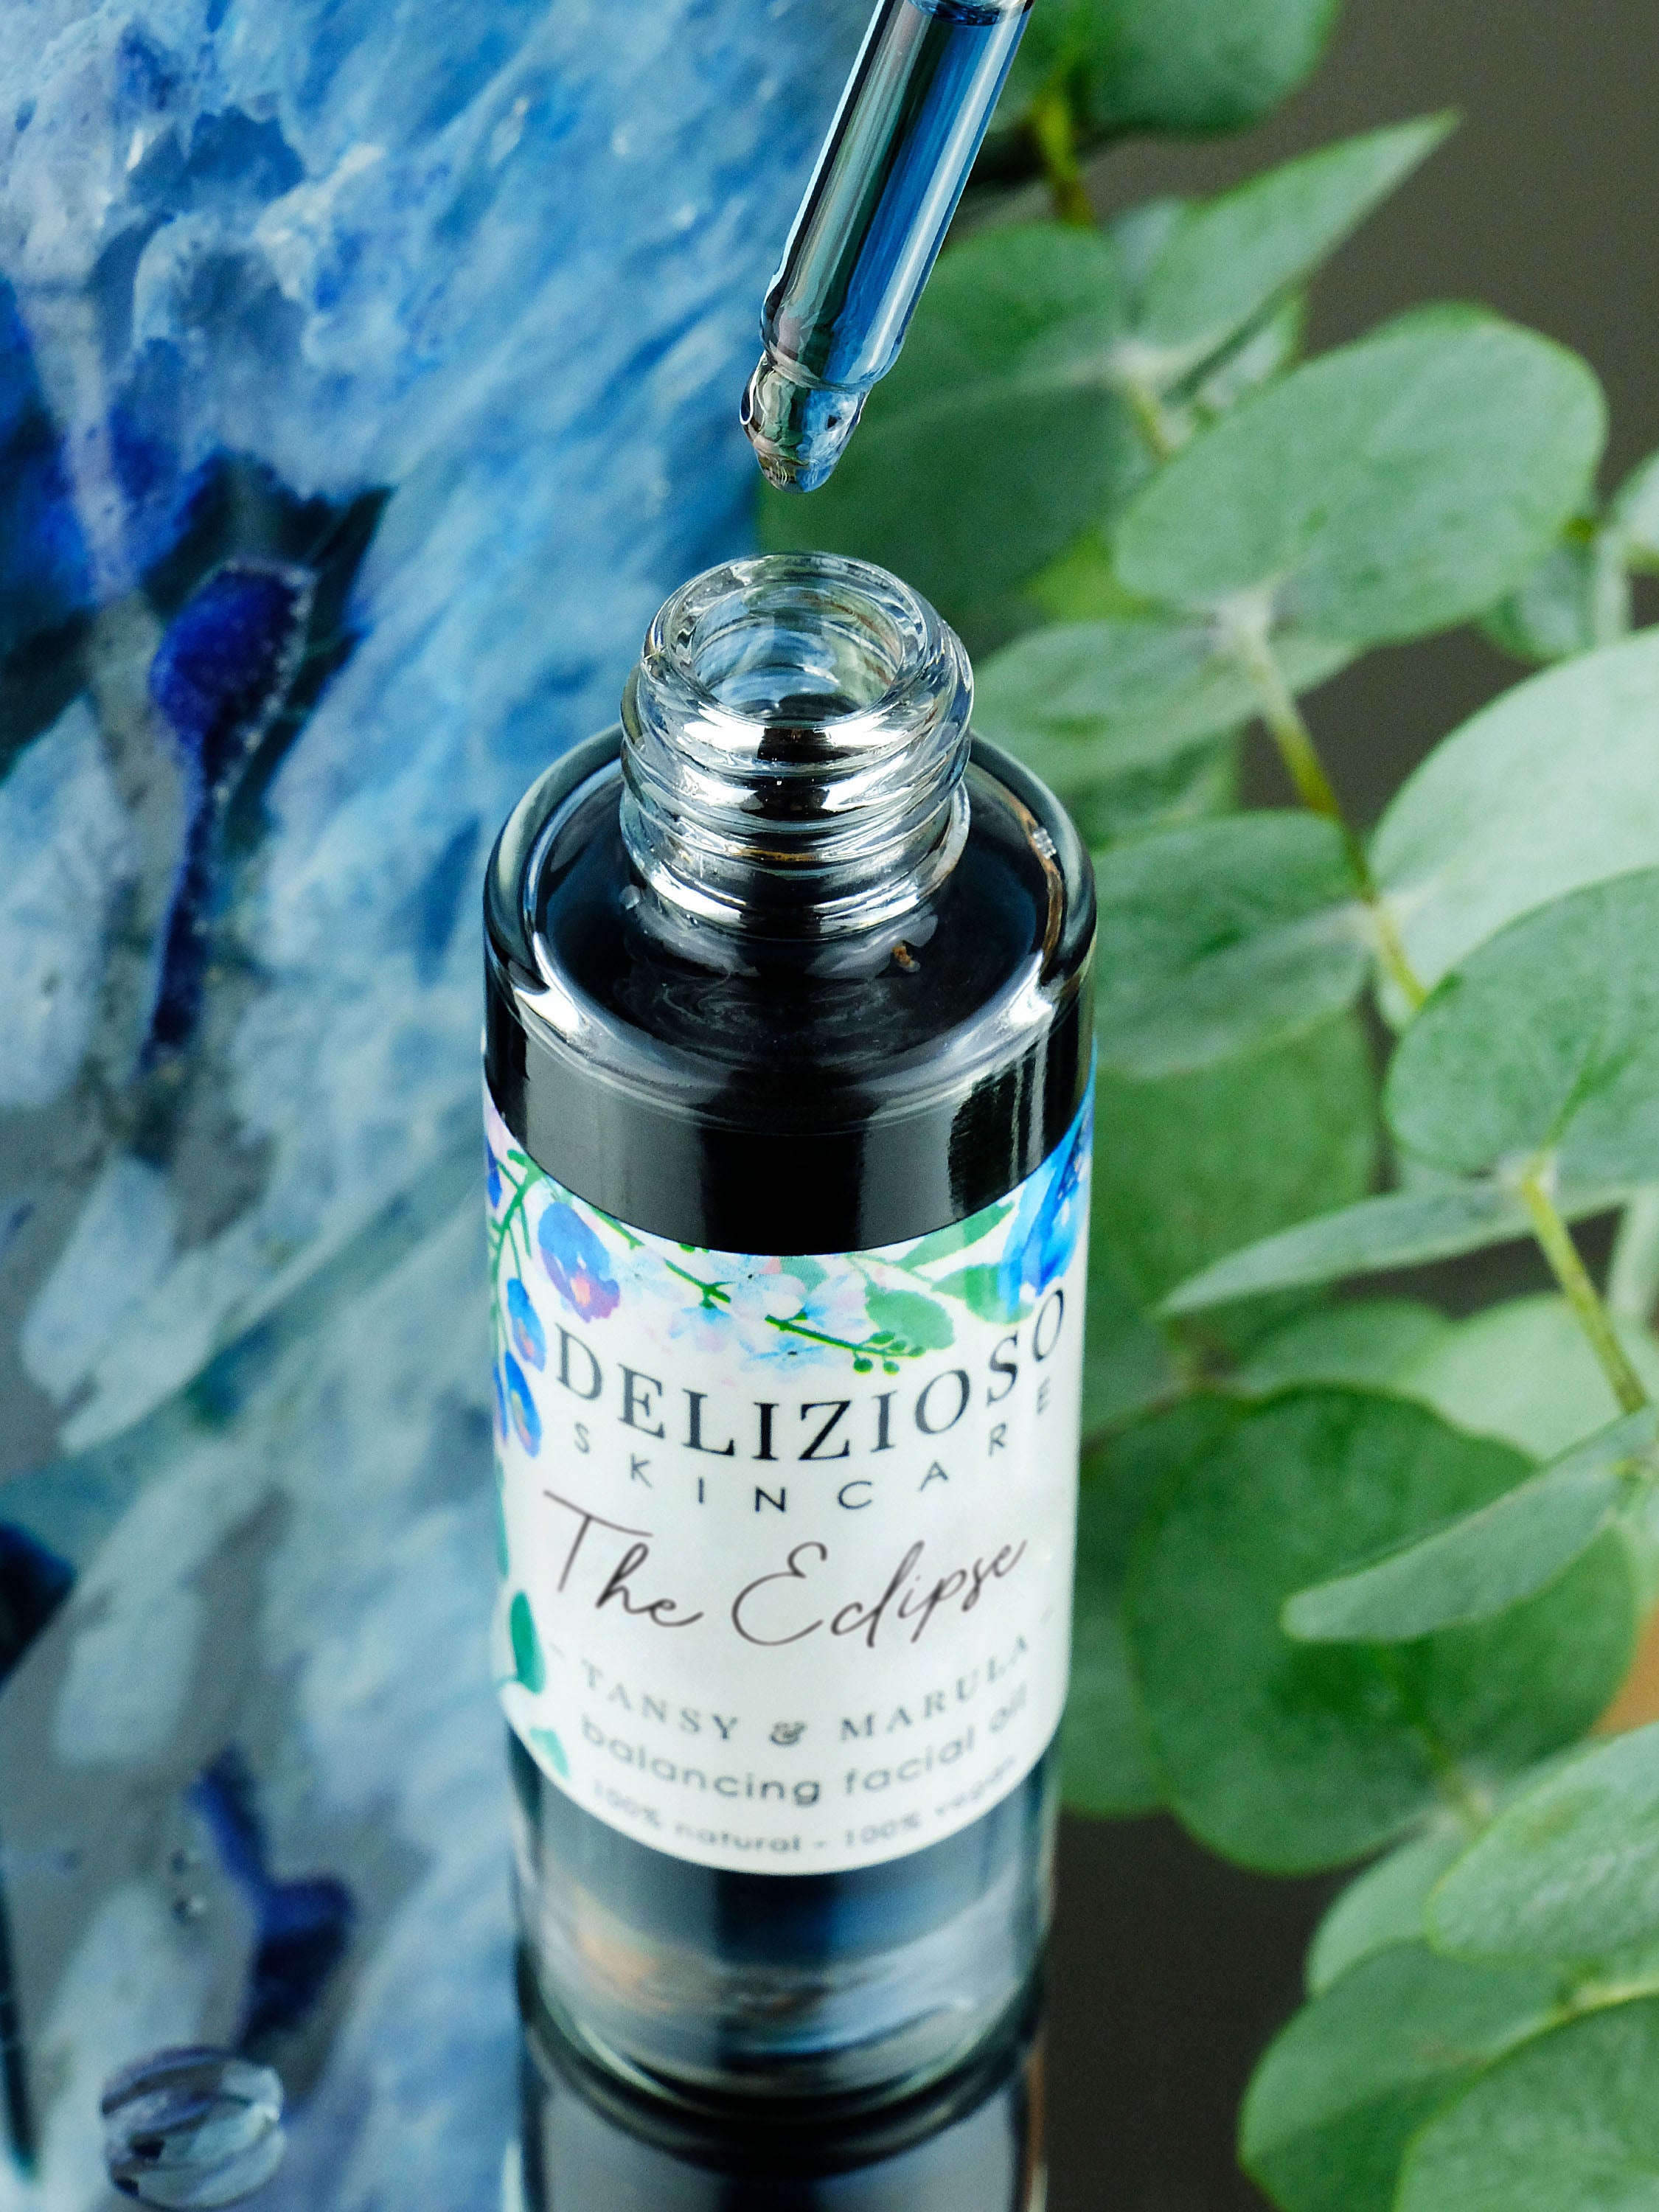 The Eclipse Blue Tansy Skin Balancing Facial Oil